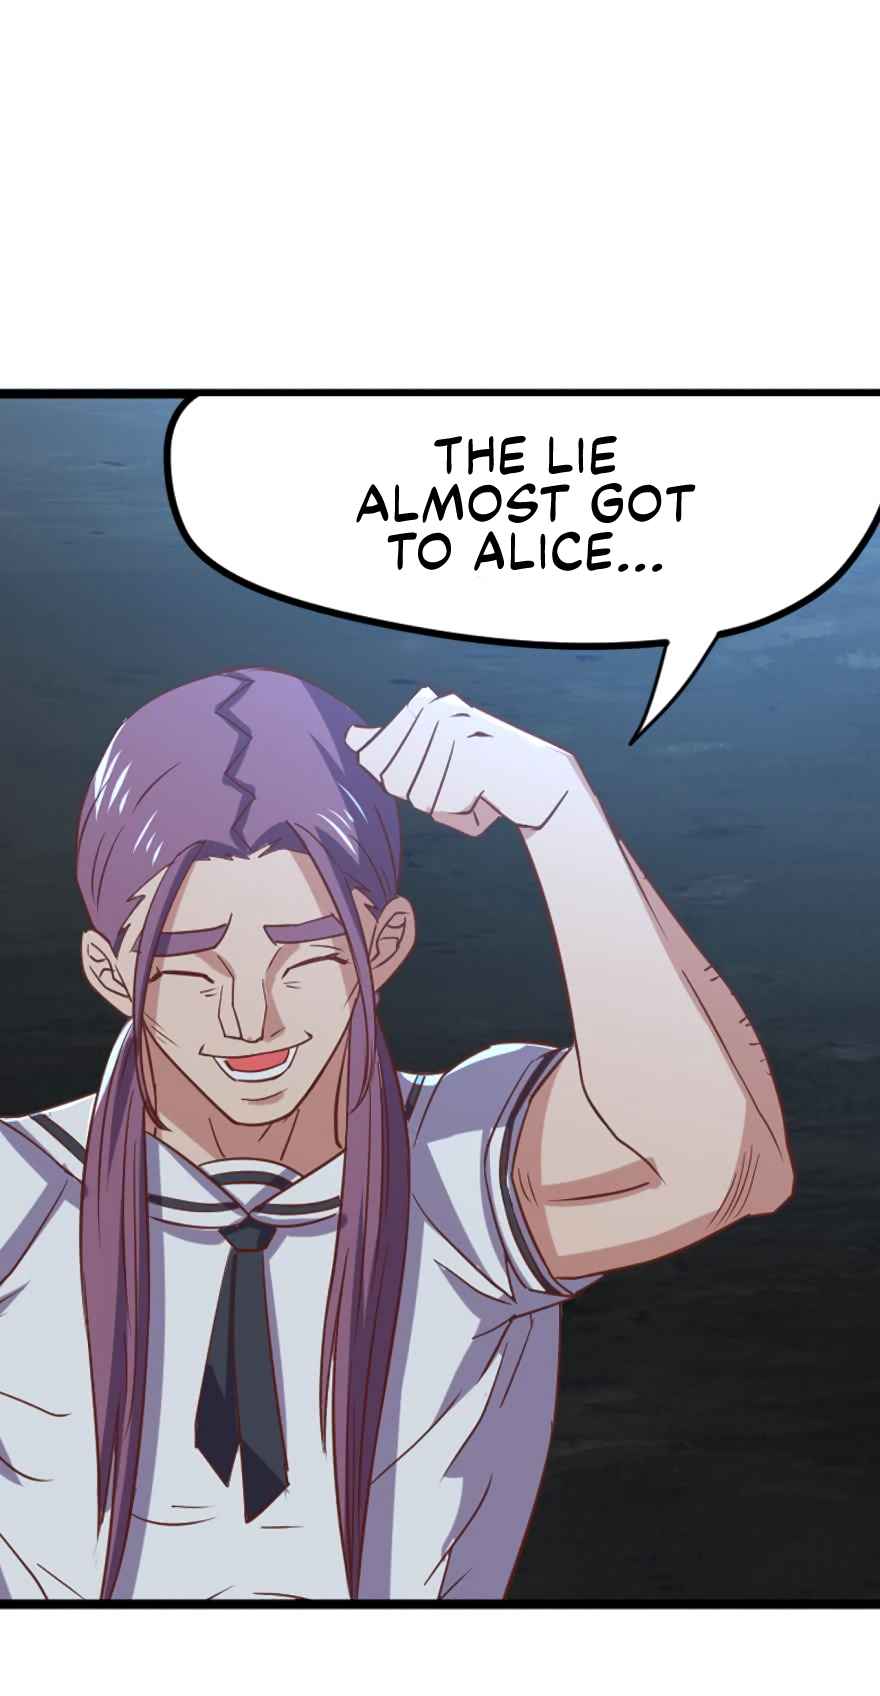 Player Reborn Ch. 73 Your Girl, Alice